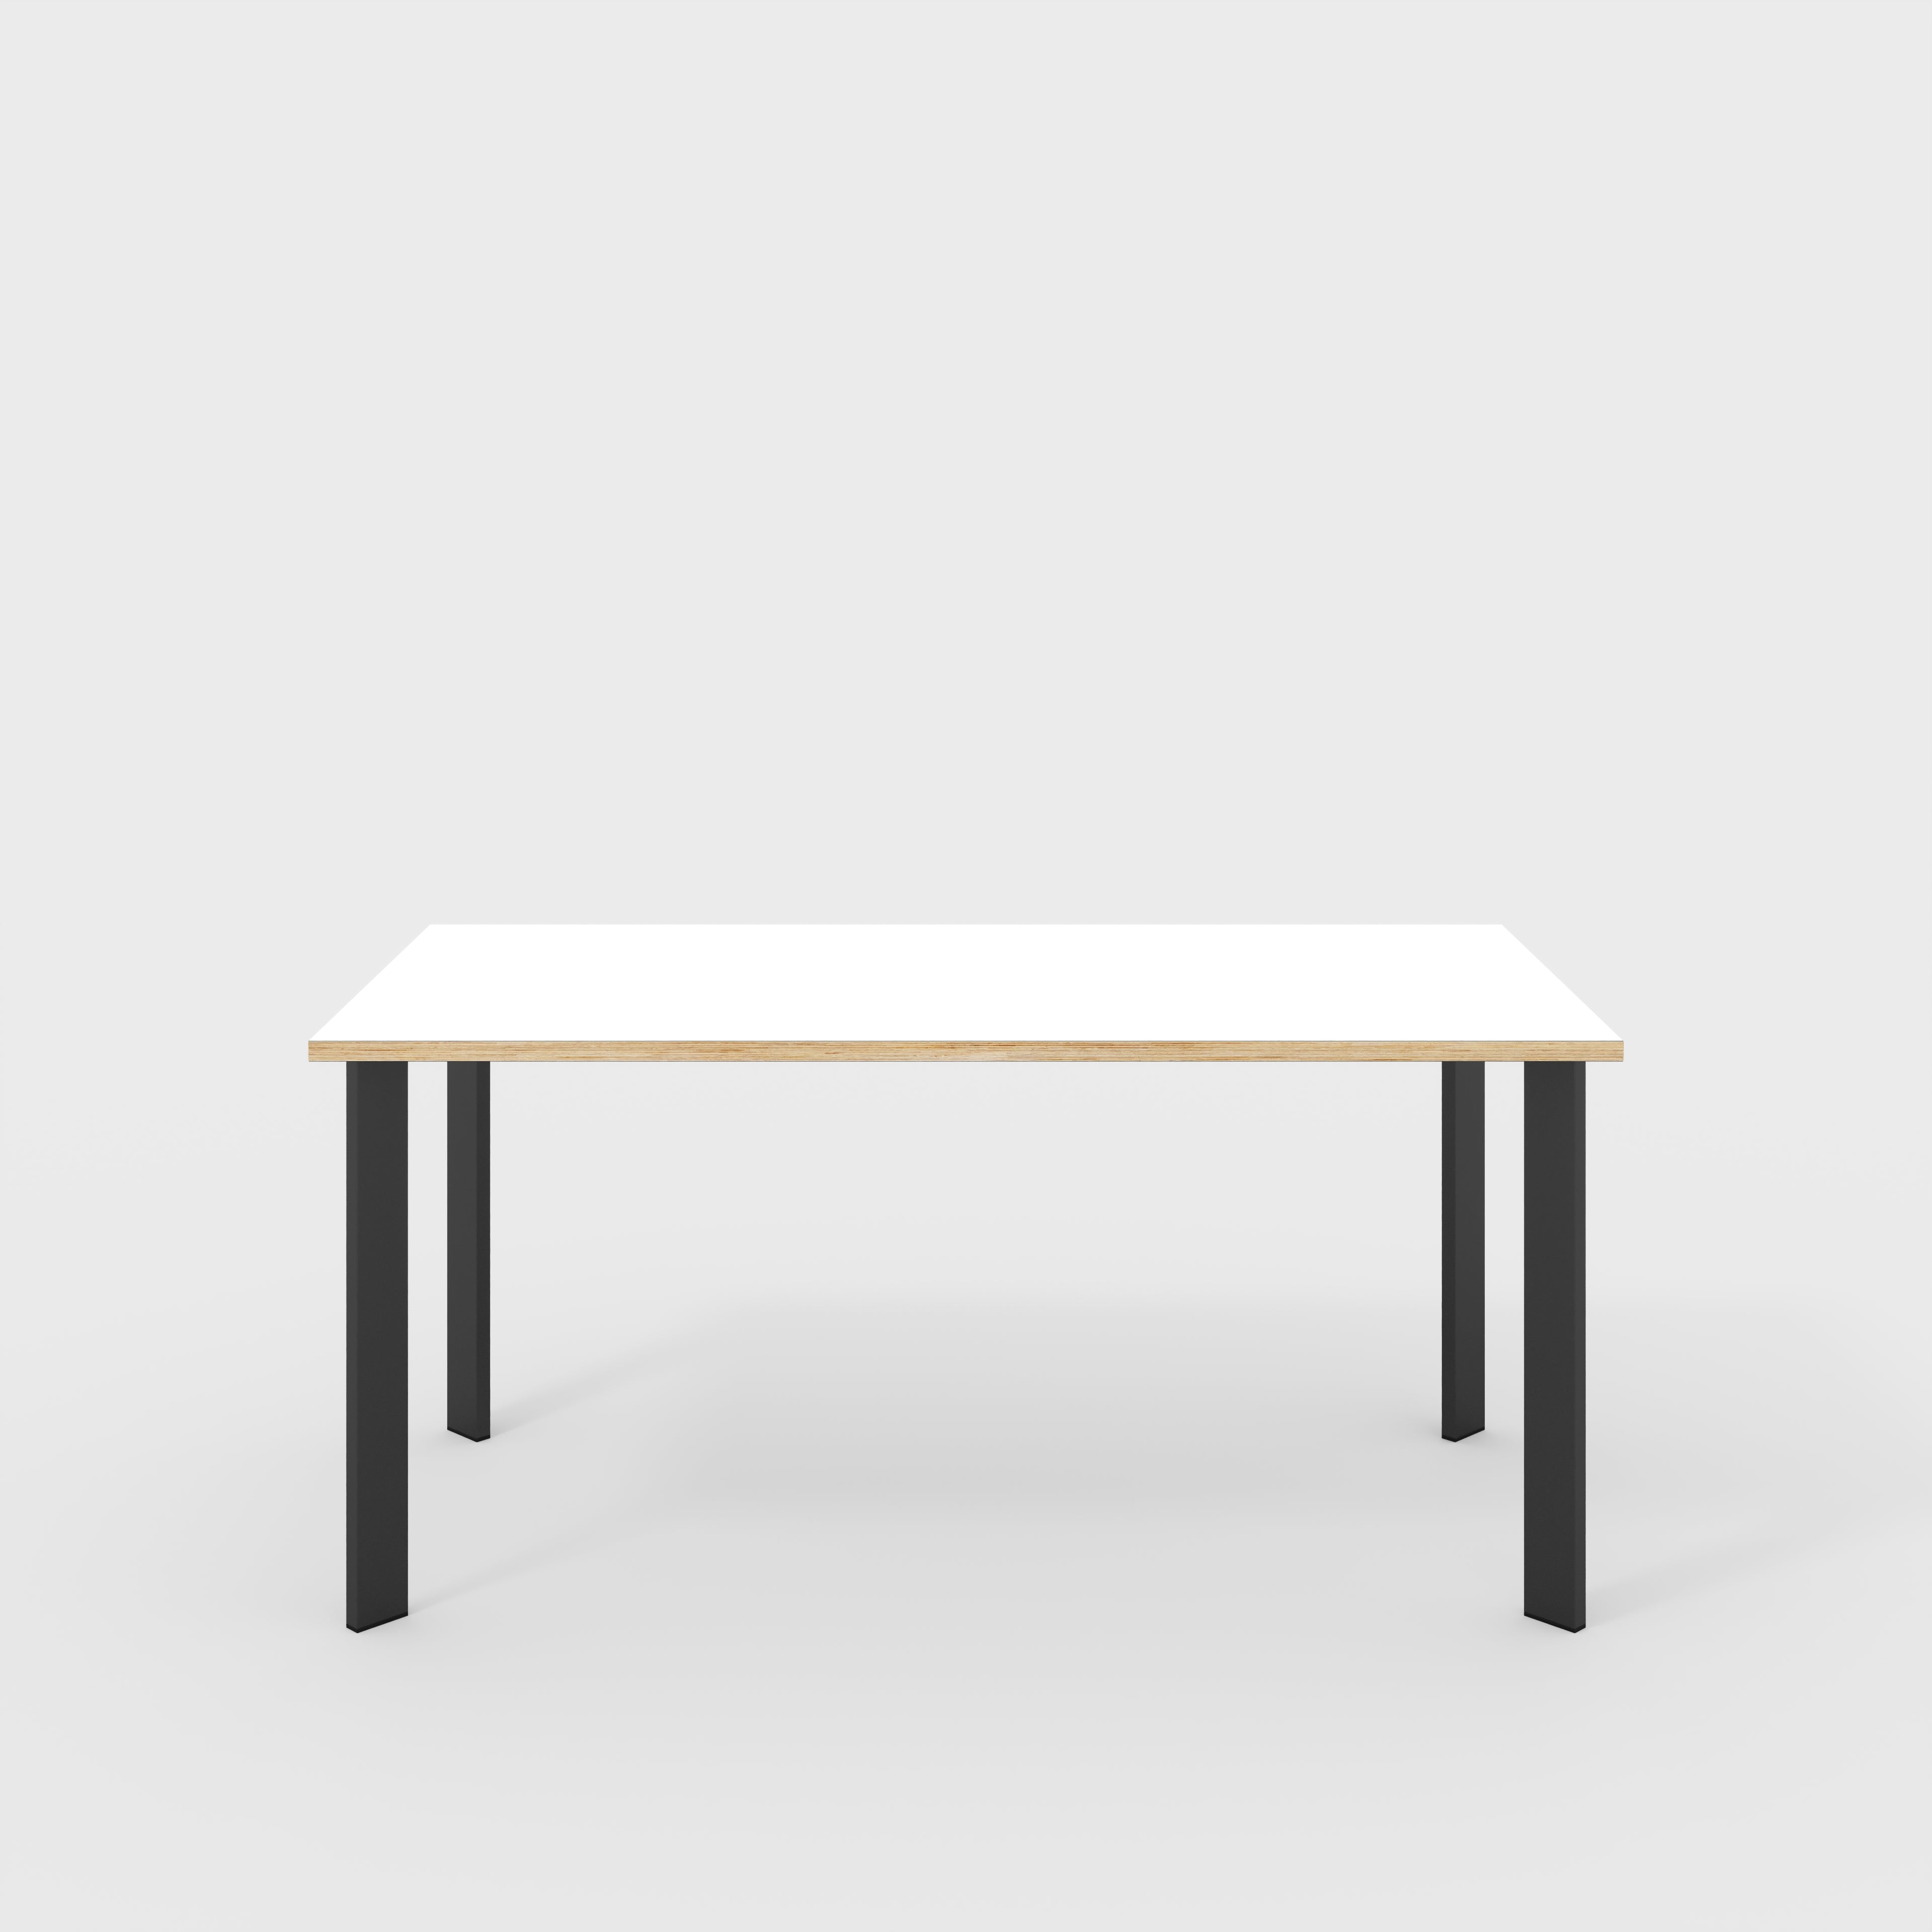 Table with Black Rectangular Single Pin Legs - Formica White - 1600(w) x 800(d) x 735(h)